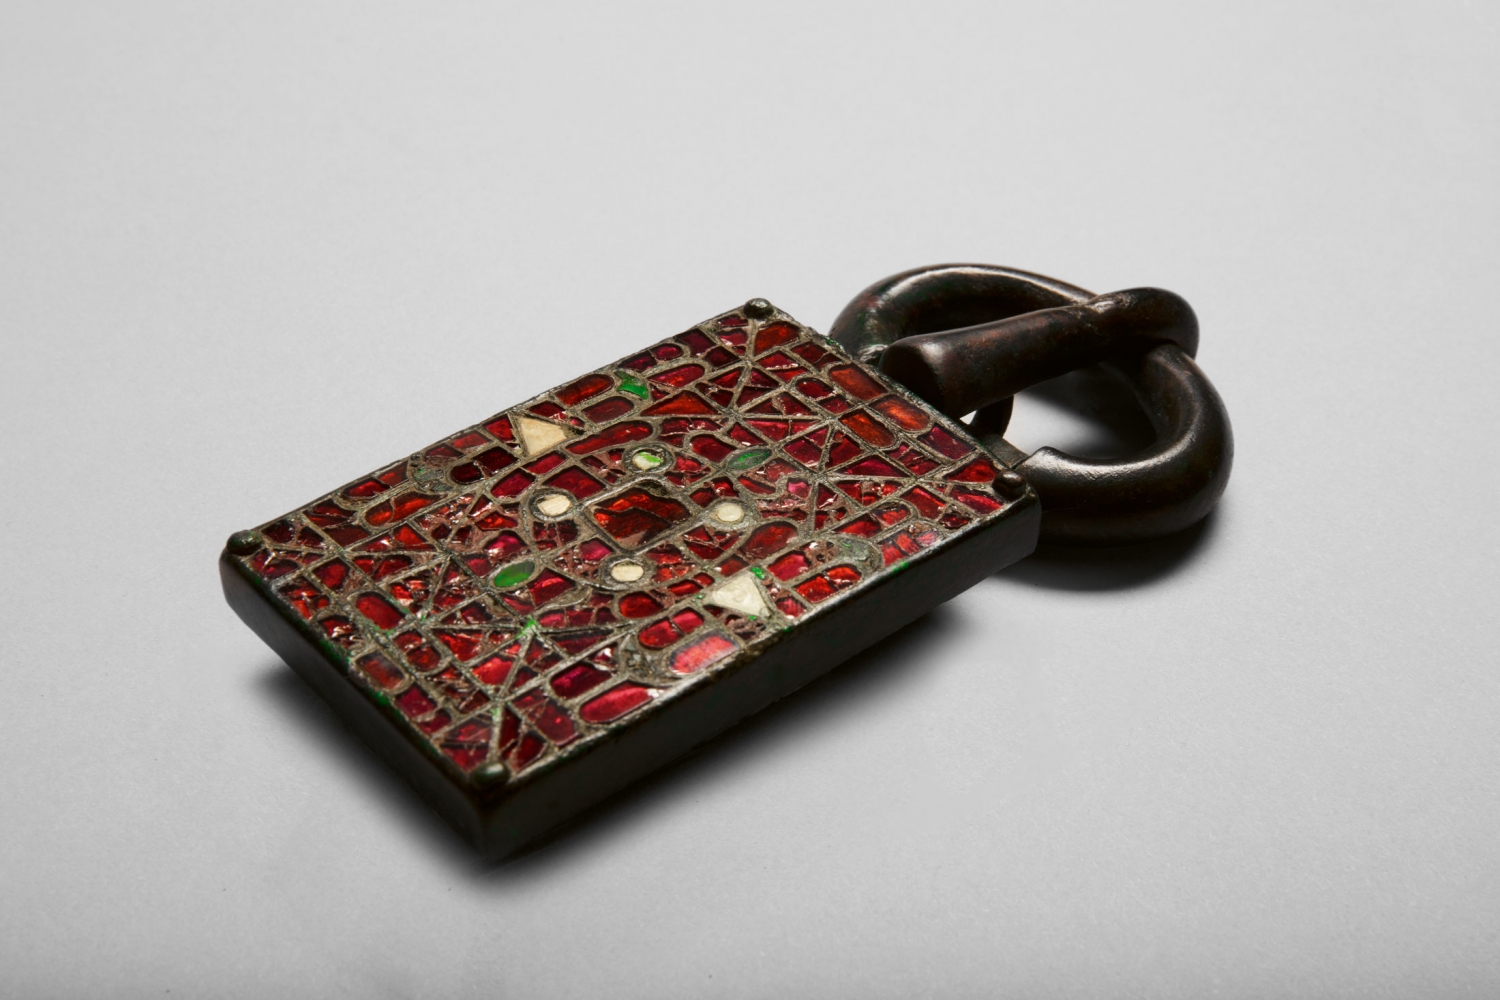 A belt buckle inlaid with garnet and glass, c. 540- 560
Visigothic Spain
Copper alloy with garnets, glass and cuttlefish bone supported by gold foils
5 1/4 x 2 3/8 x 1 inches
(13.5 x 6.1 x 2.5 cm)